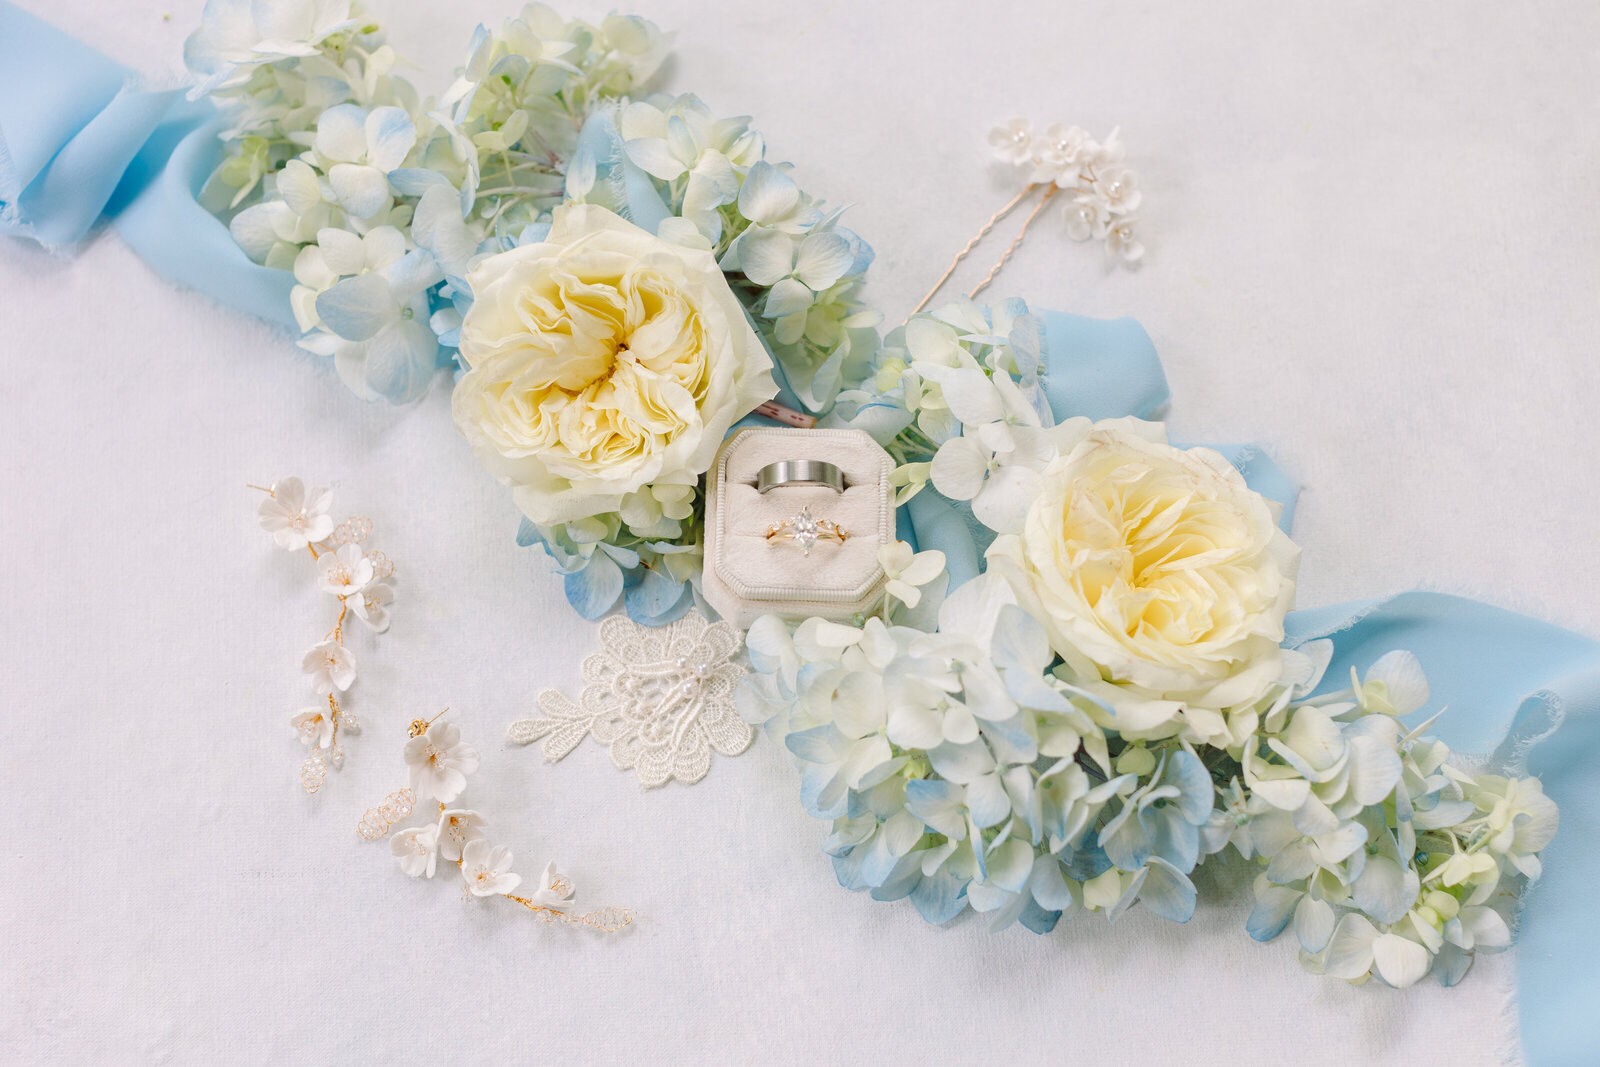 Shades of blue and white bridal details with soft flowers